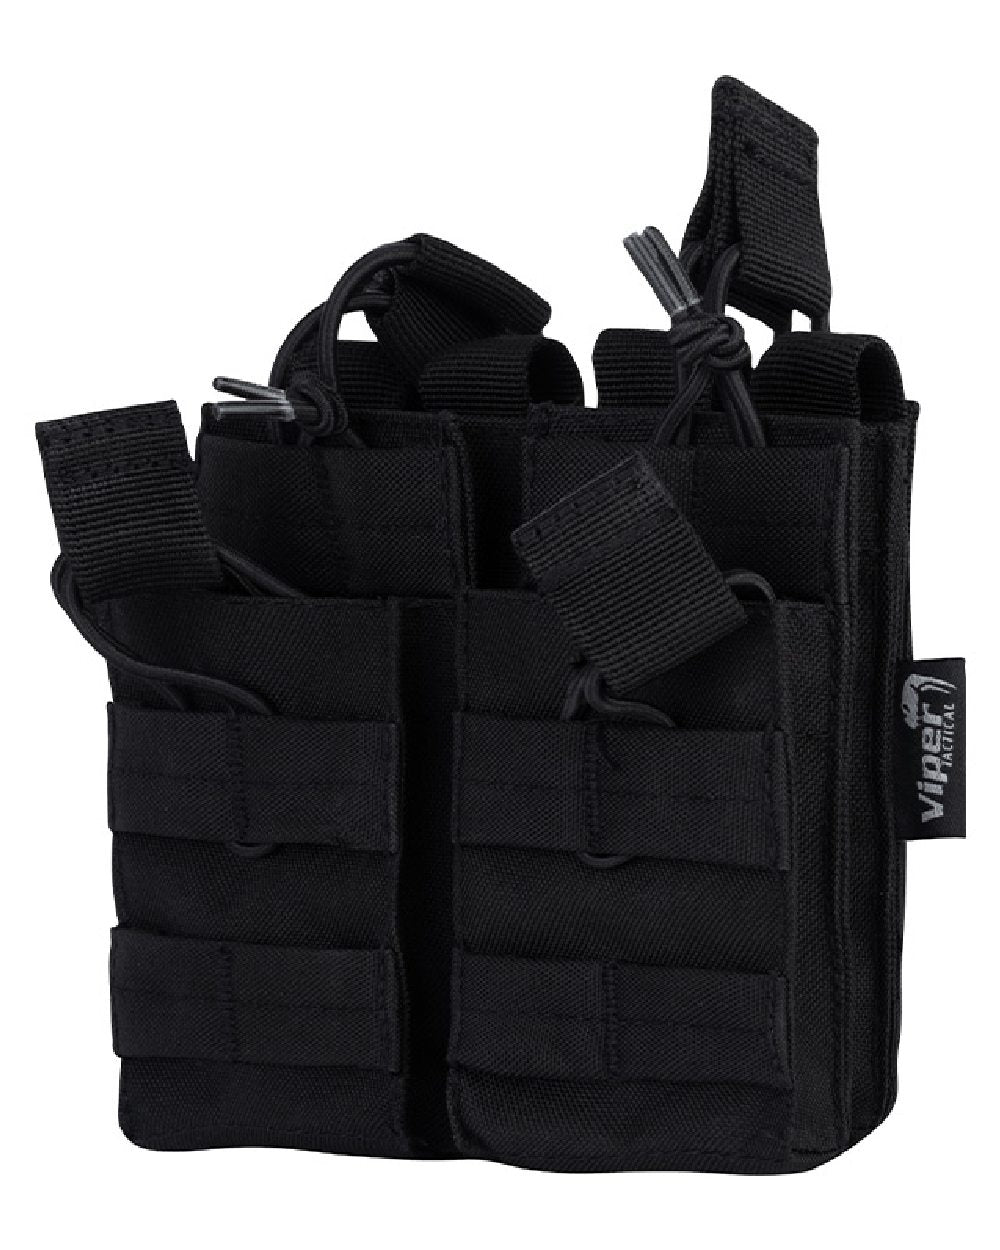 Viper Double Duo Mag Pouch in Black 